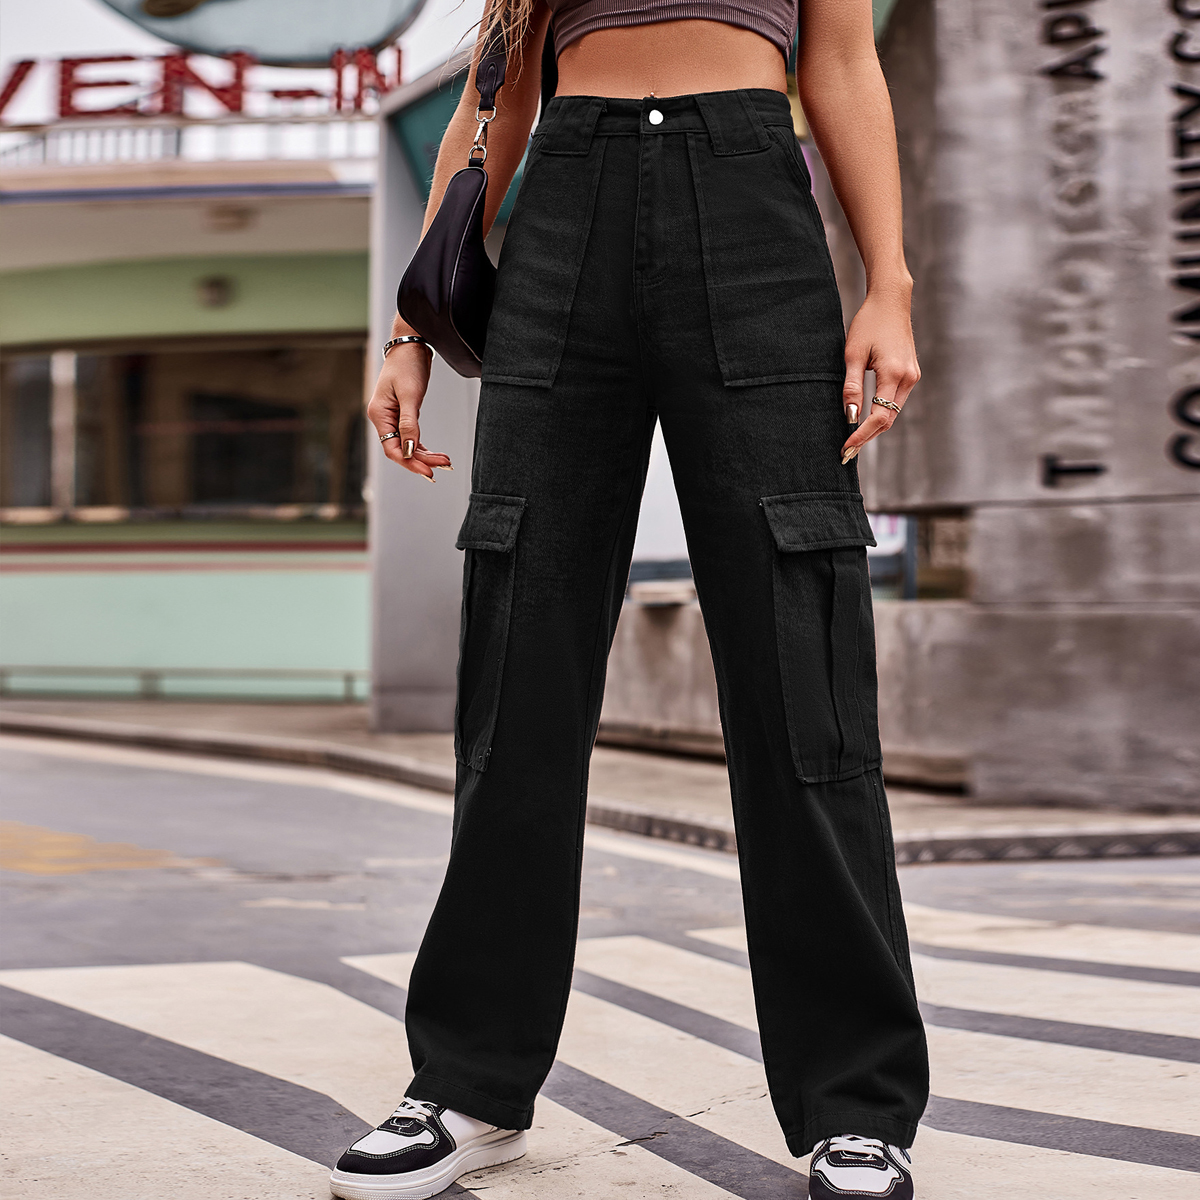 High Waisted Cargo Pants With Belt  Shop Whats New at Papaya Clothing